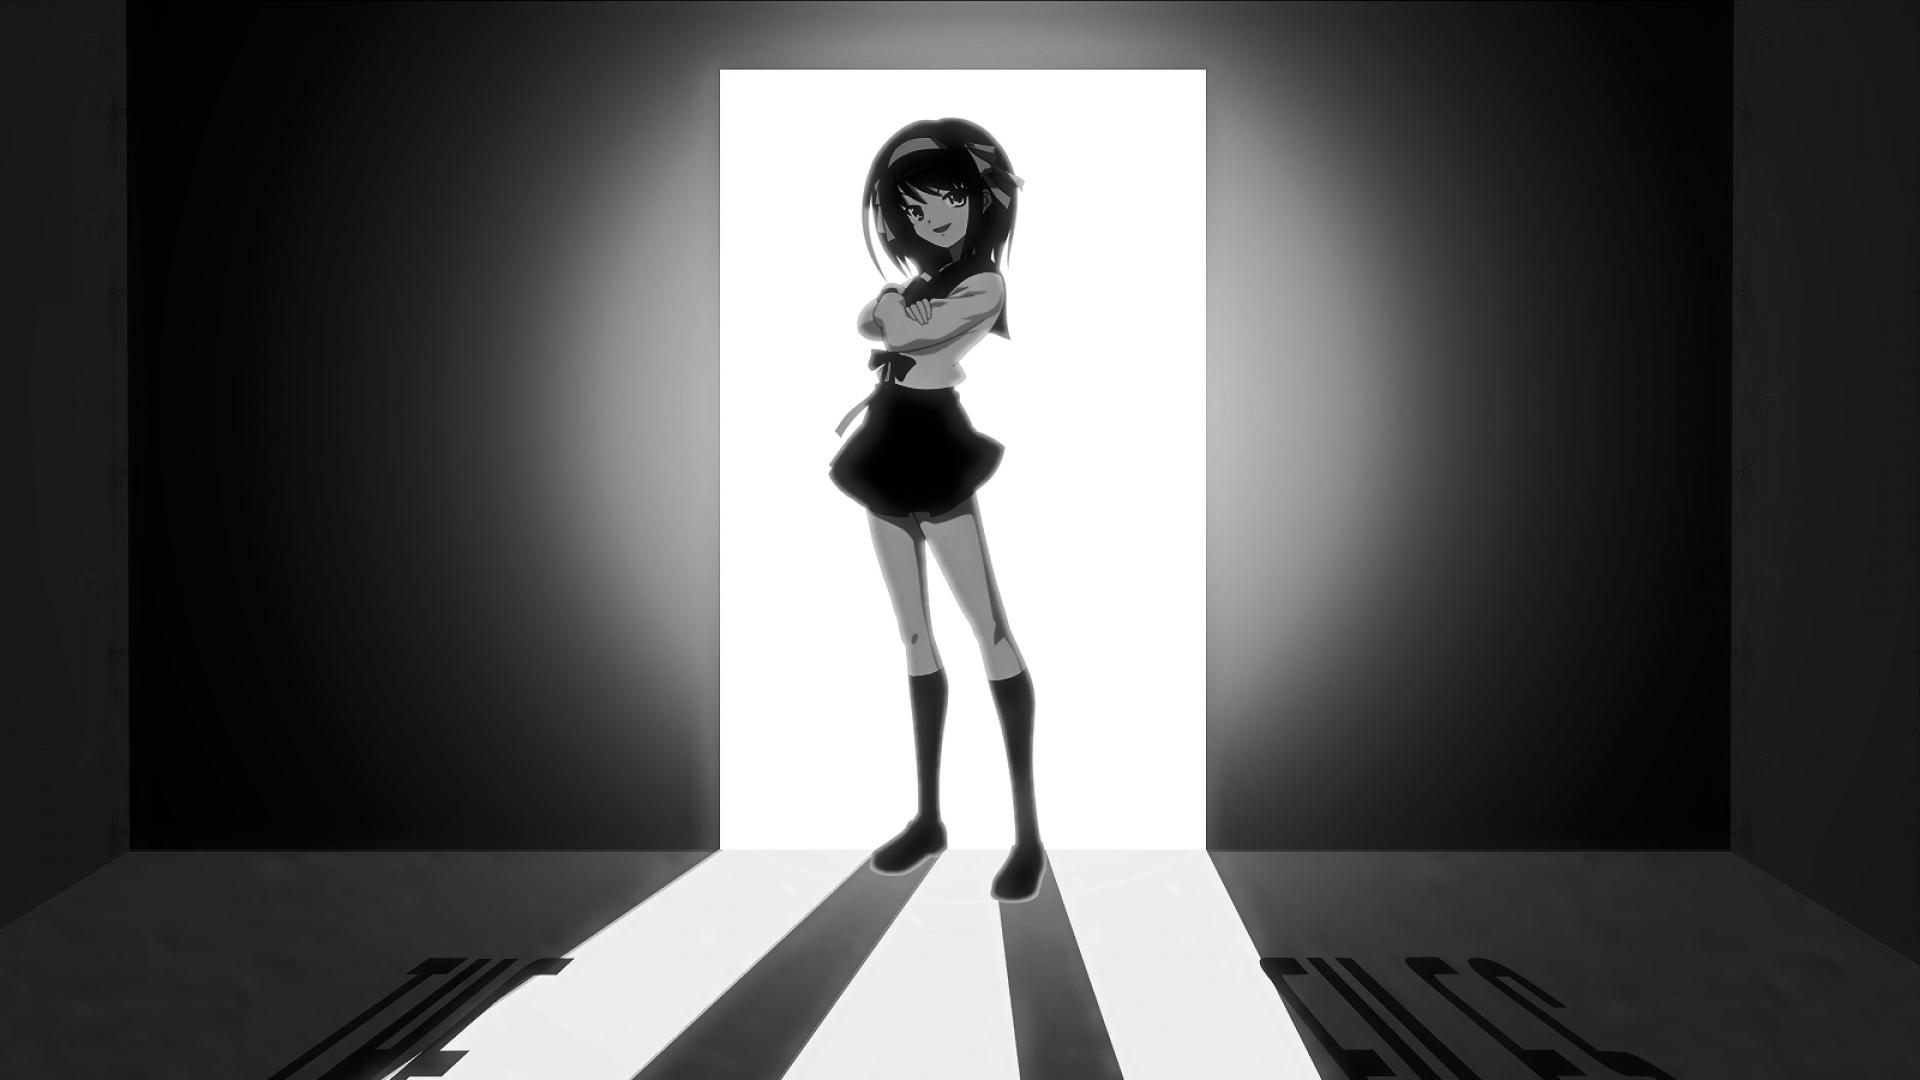 Anime Art Black And White Wallpapers